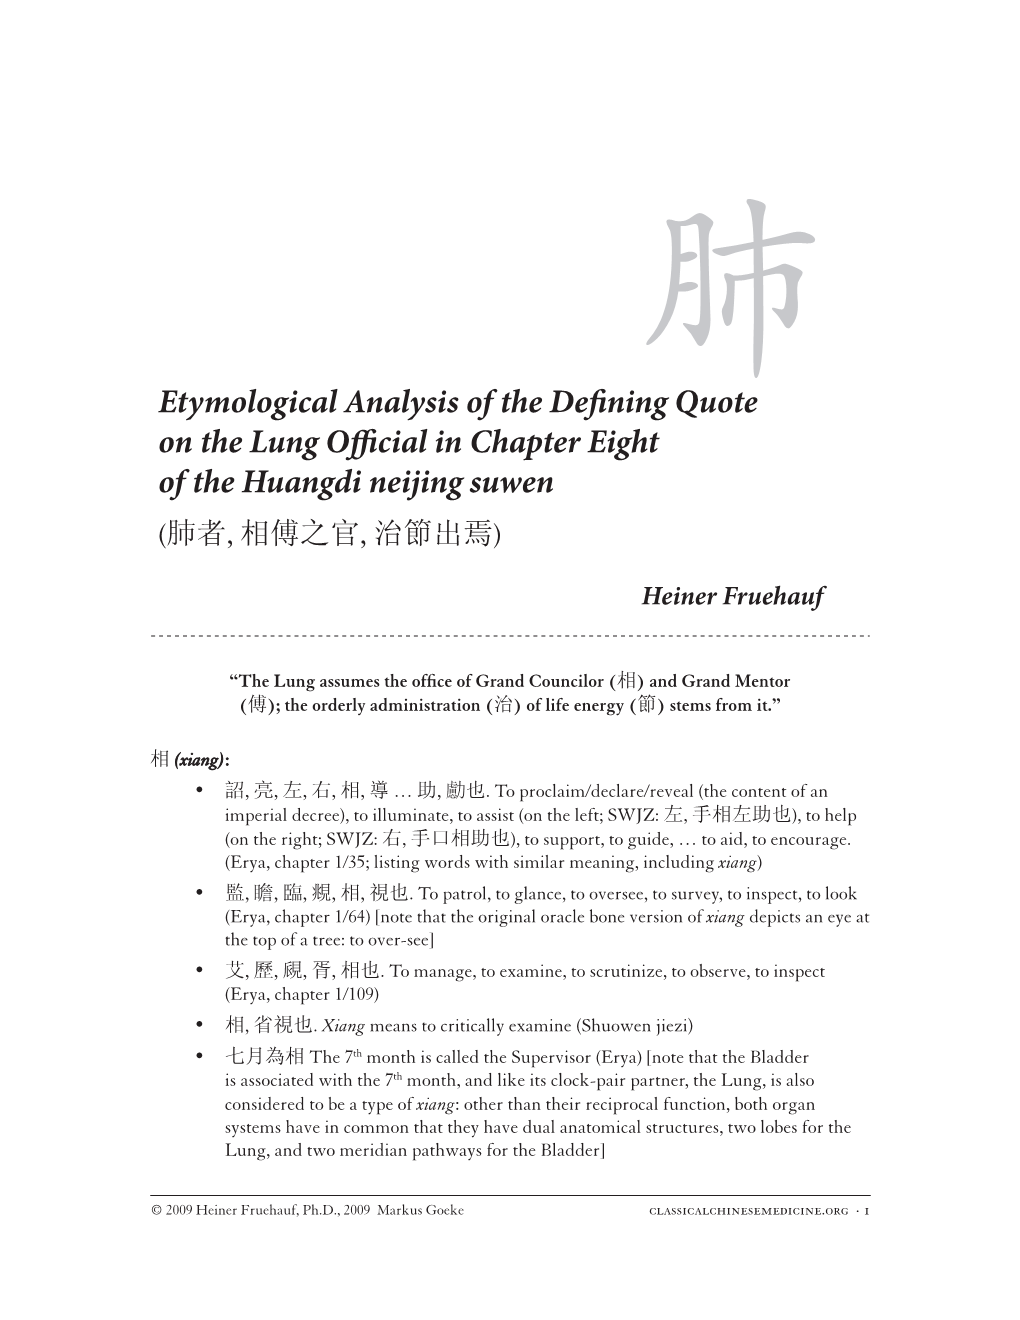 Etymological Analysis of the Defining Quote on the Lung Official in Chapter Eight of the Huangdi Neijing Suwen (肺者, 相傅之官, 治節出焉)